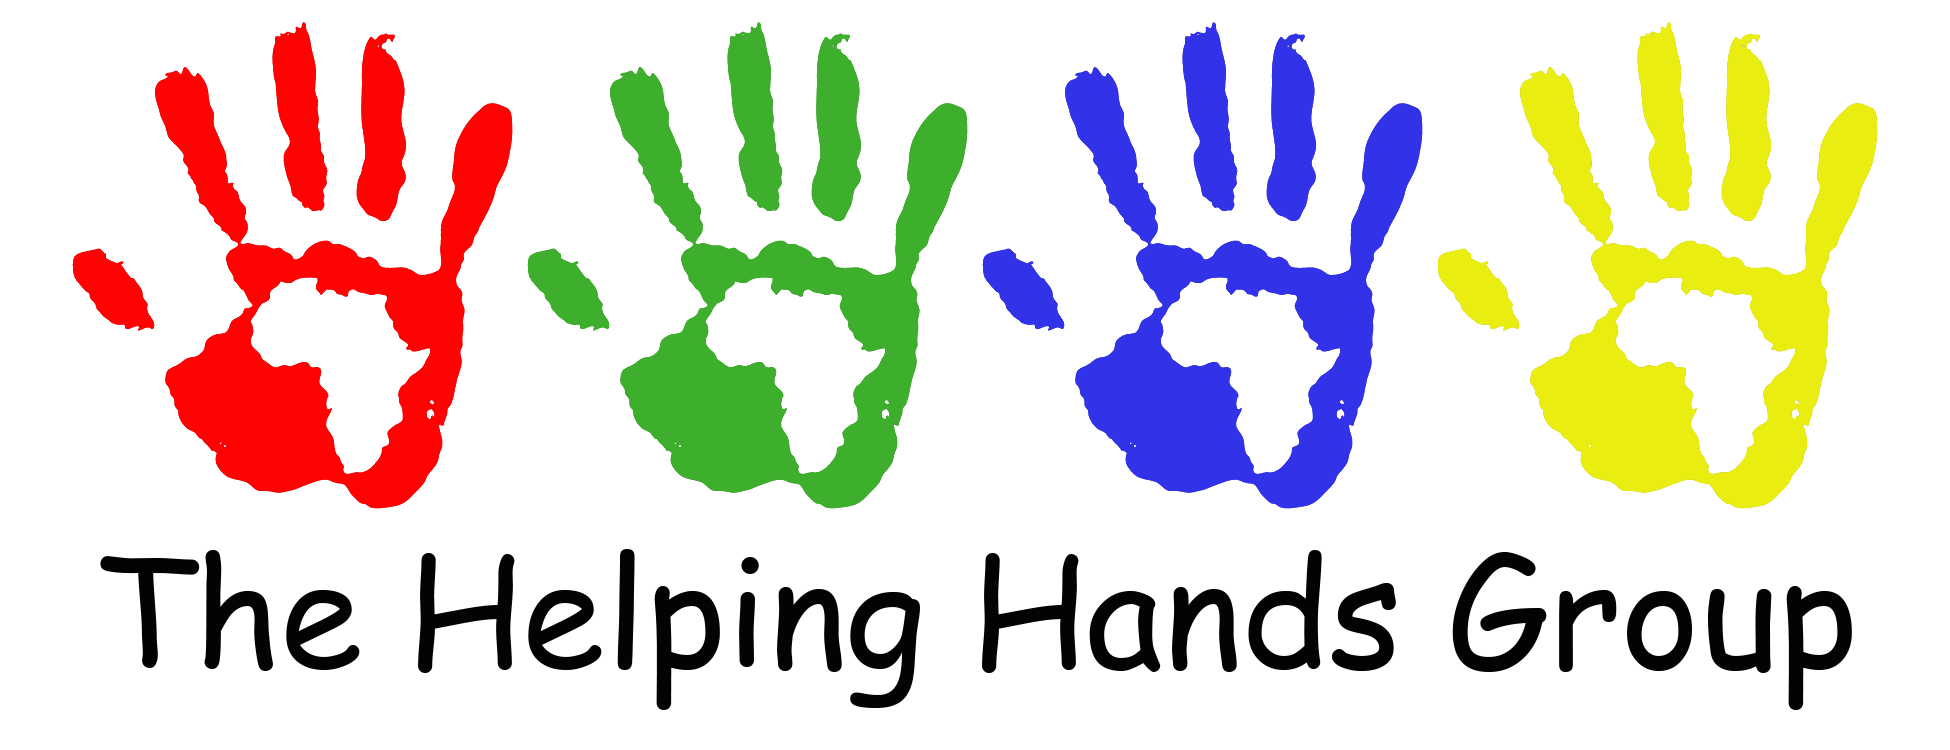 Colored Hands Logo - Donate | The Helping Hands Group